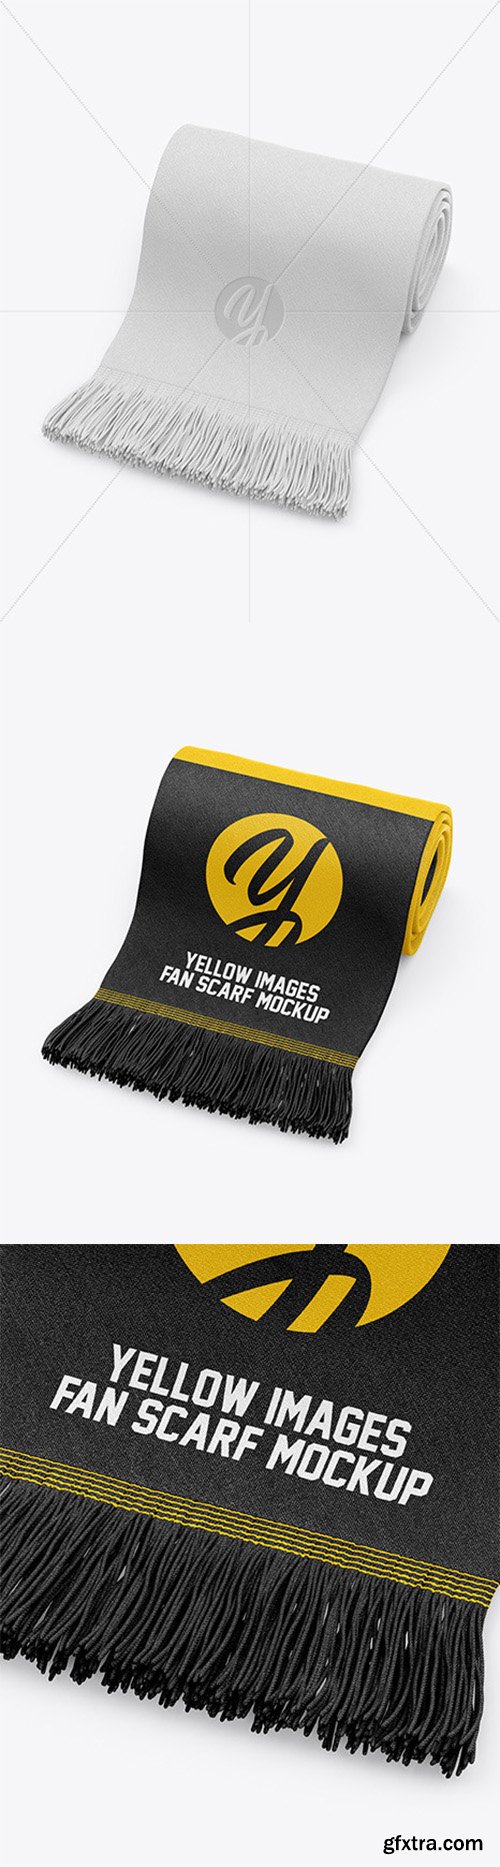 Download Get Scarf Mockup PNG Yellowimages - Free PSD Mockup Templates